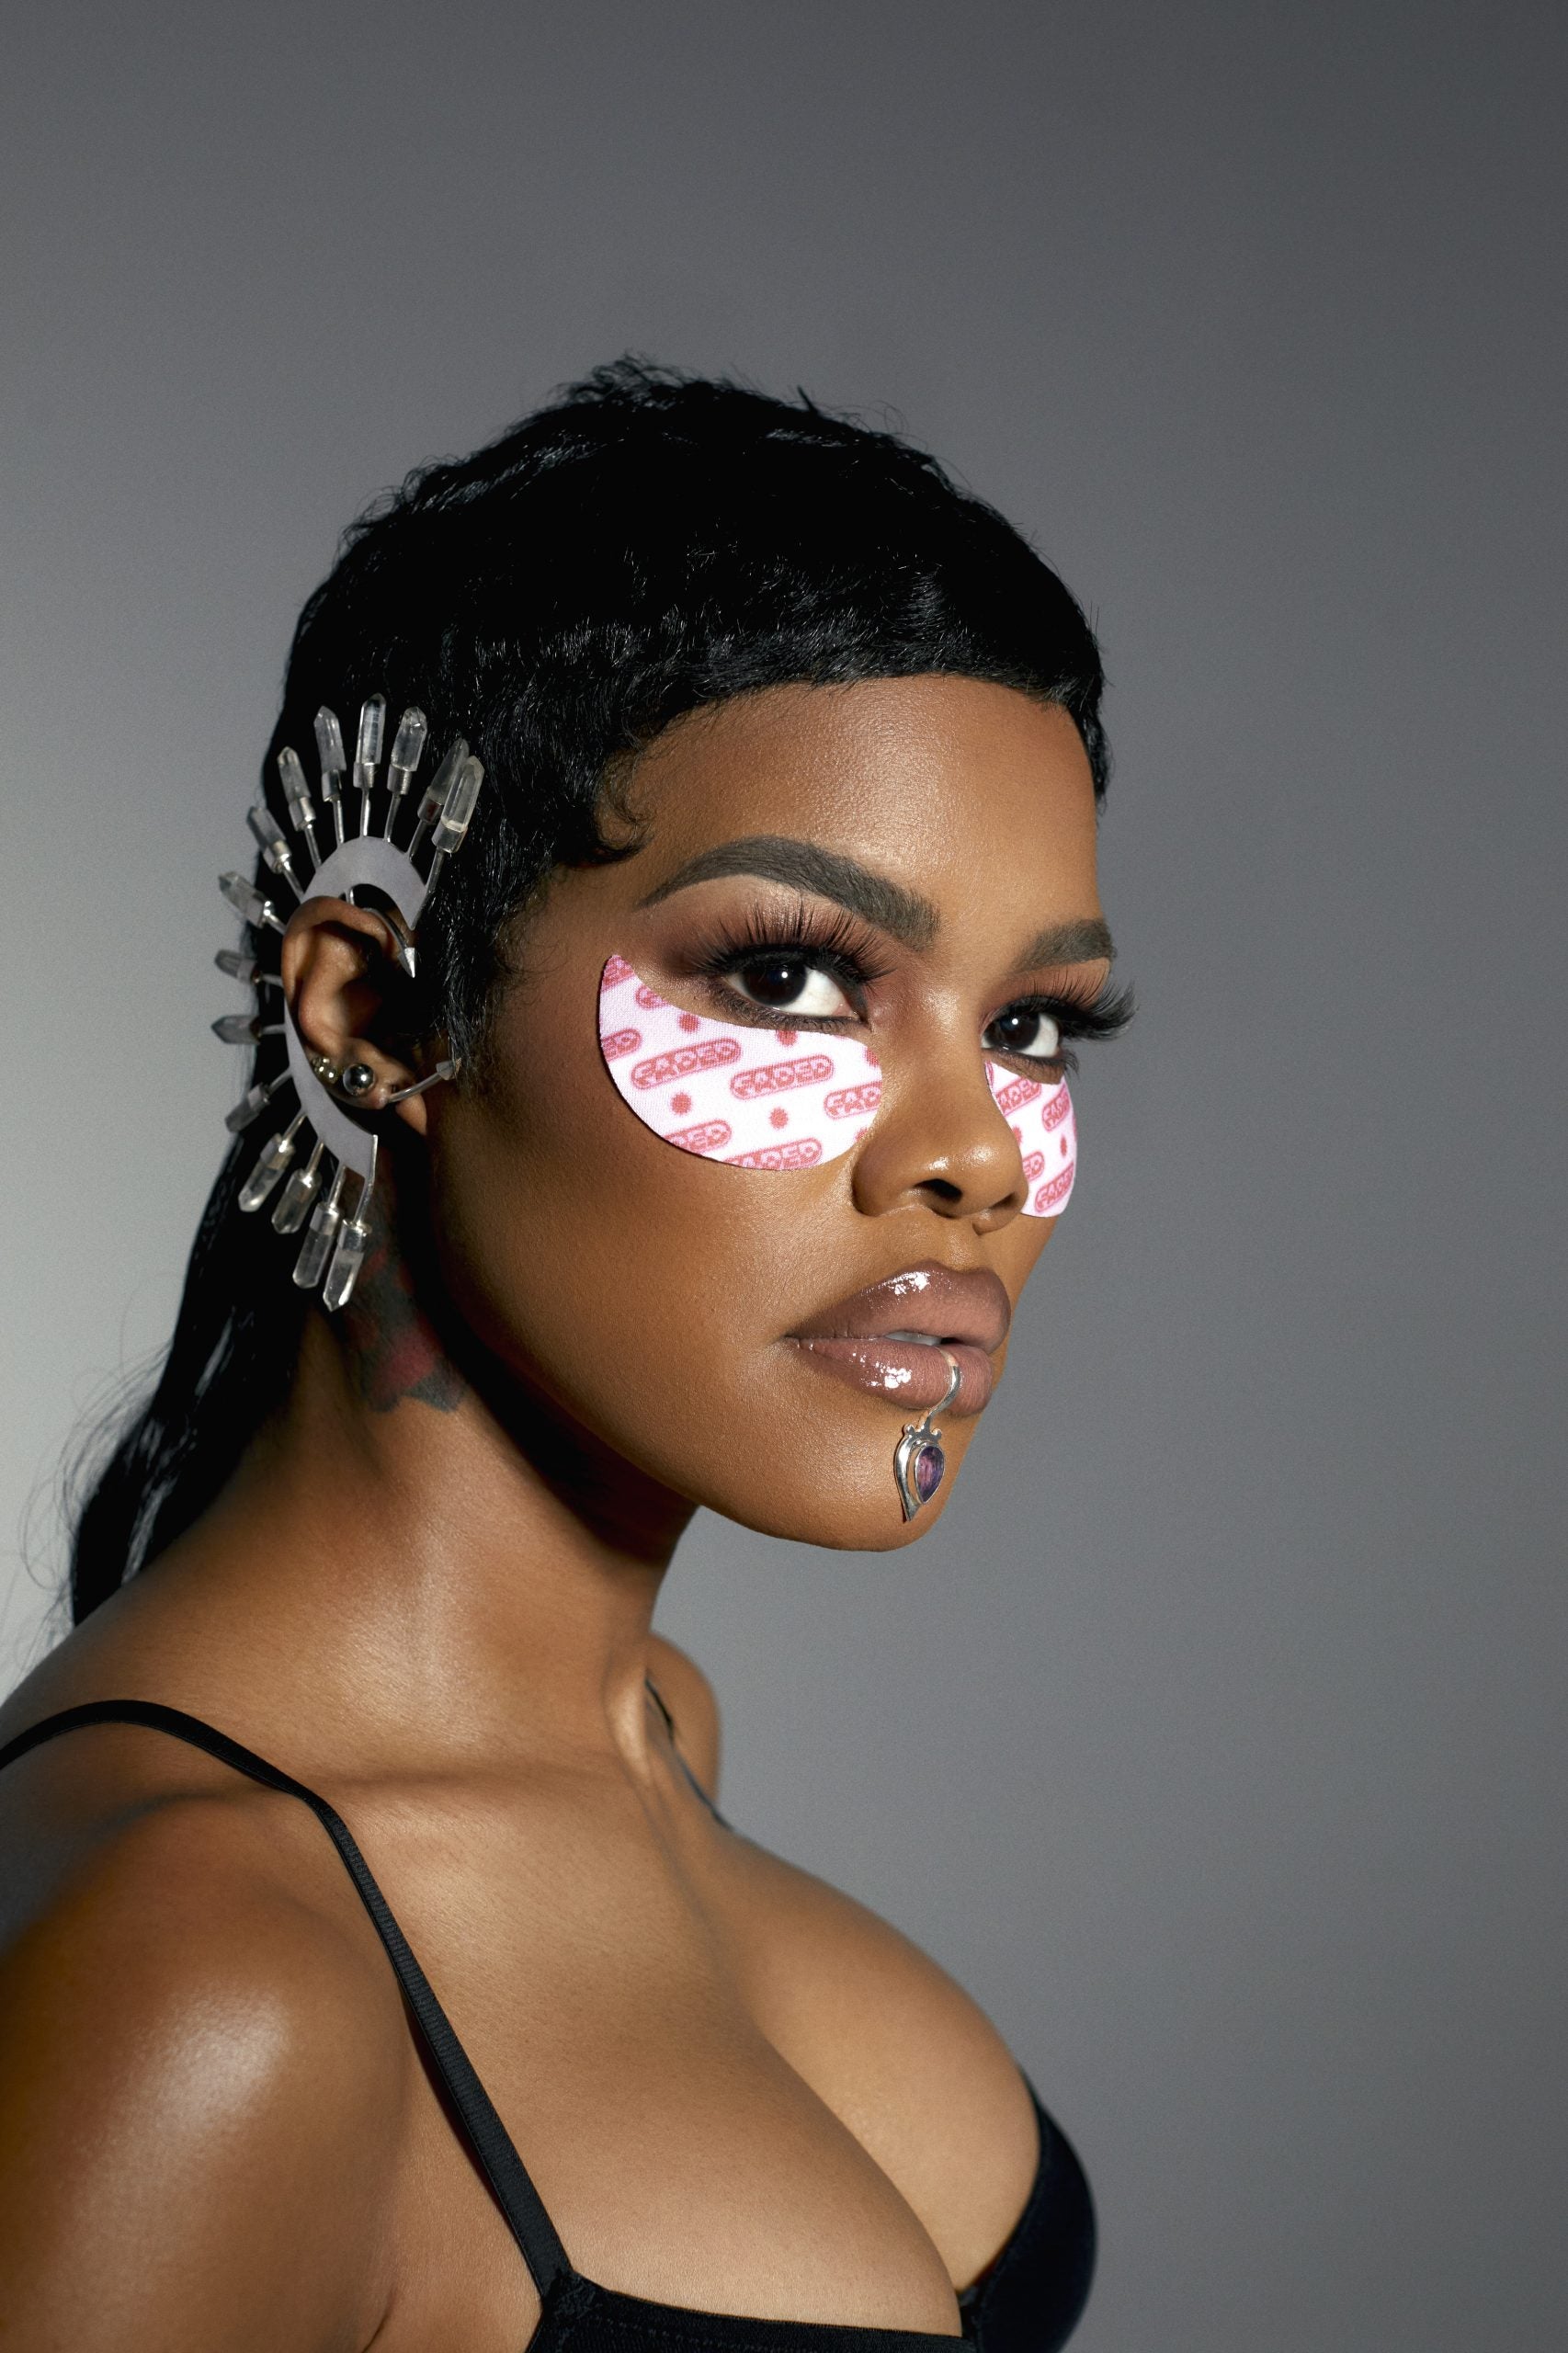 Topicals’ New Campaign With Teyana Taylor Celebrates Individuality